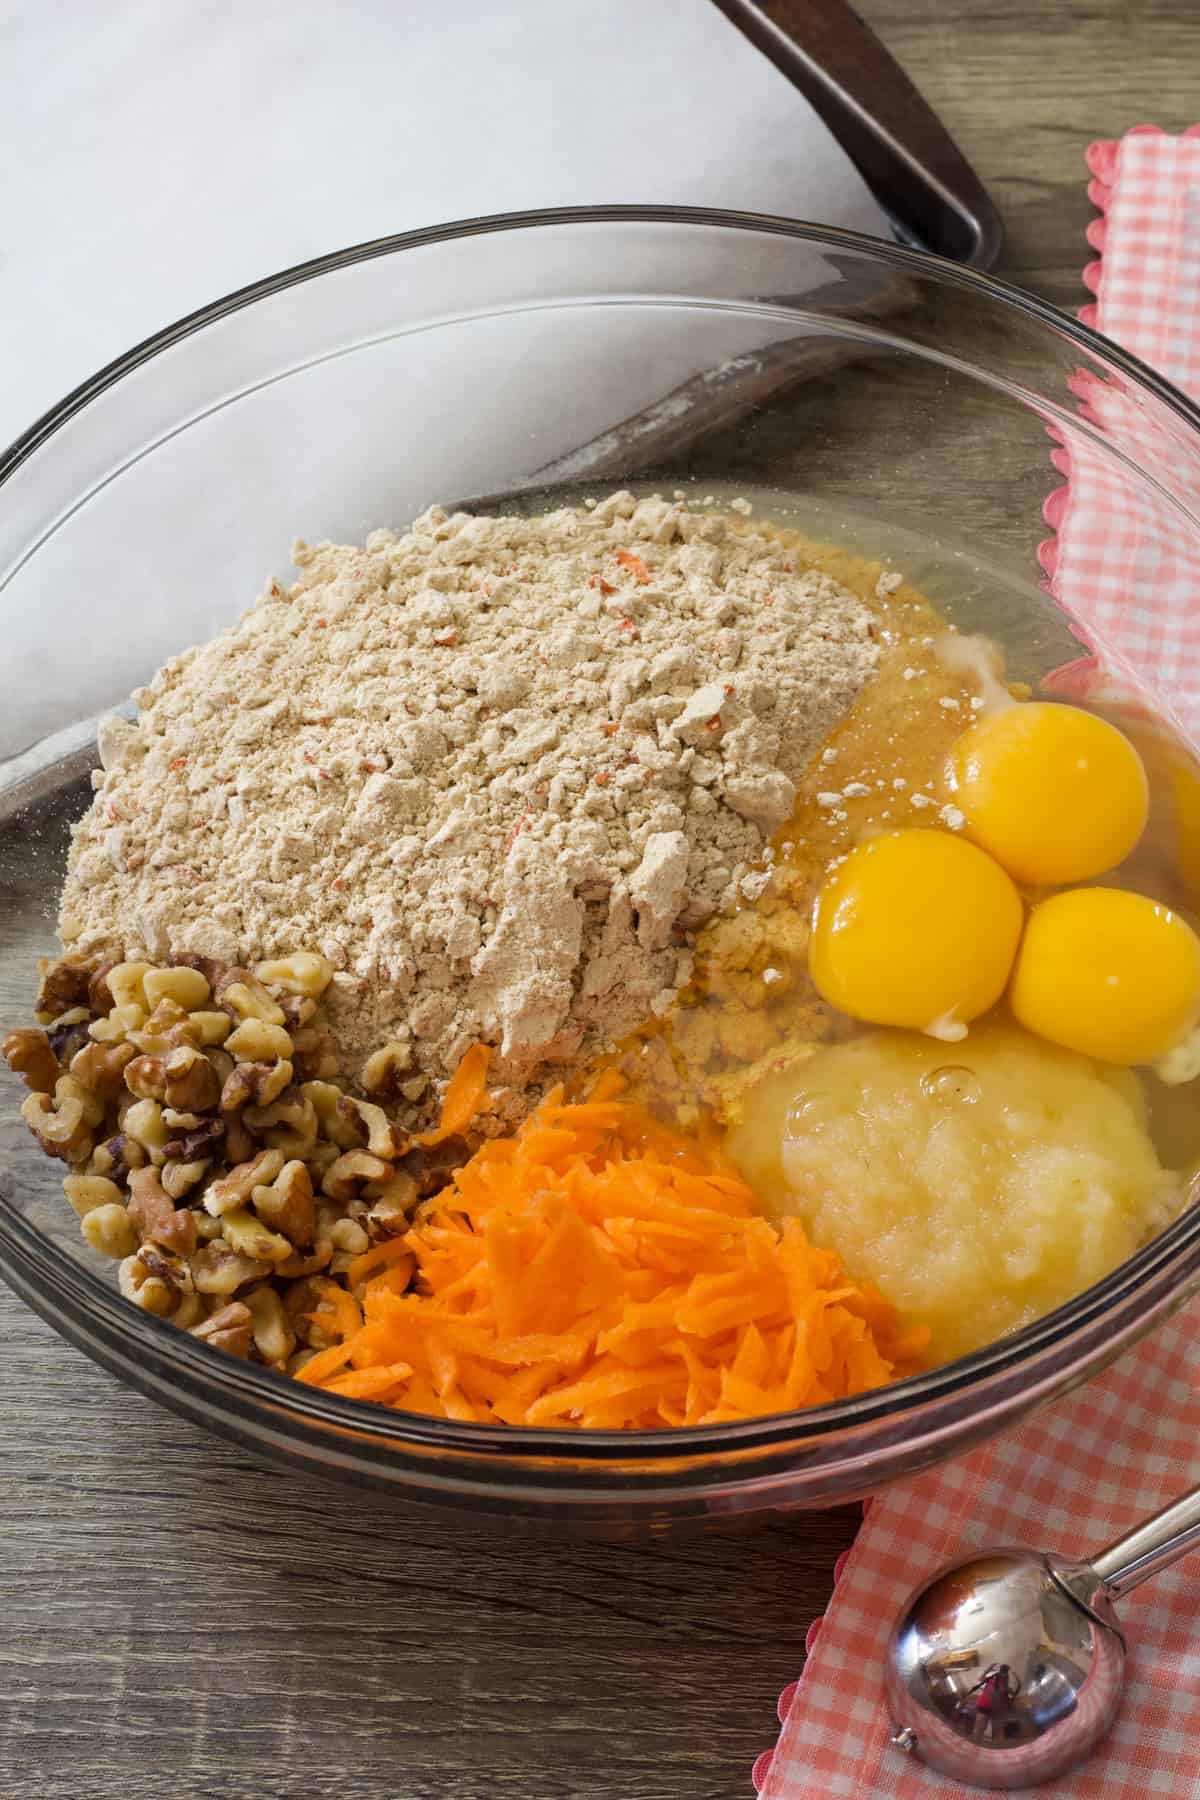 cake mix, eggs, carrots, applesauce and nuts in a bowl.